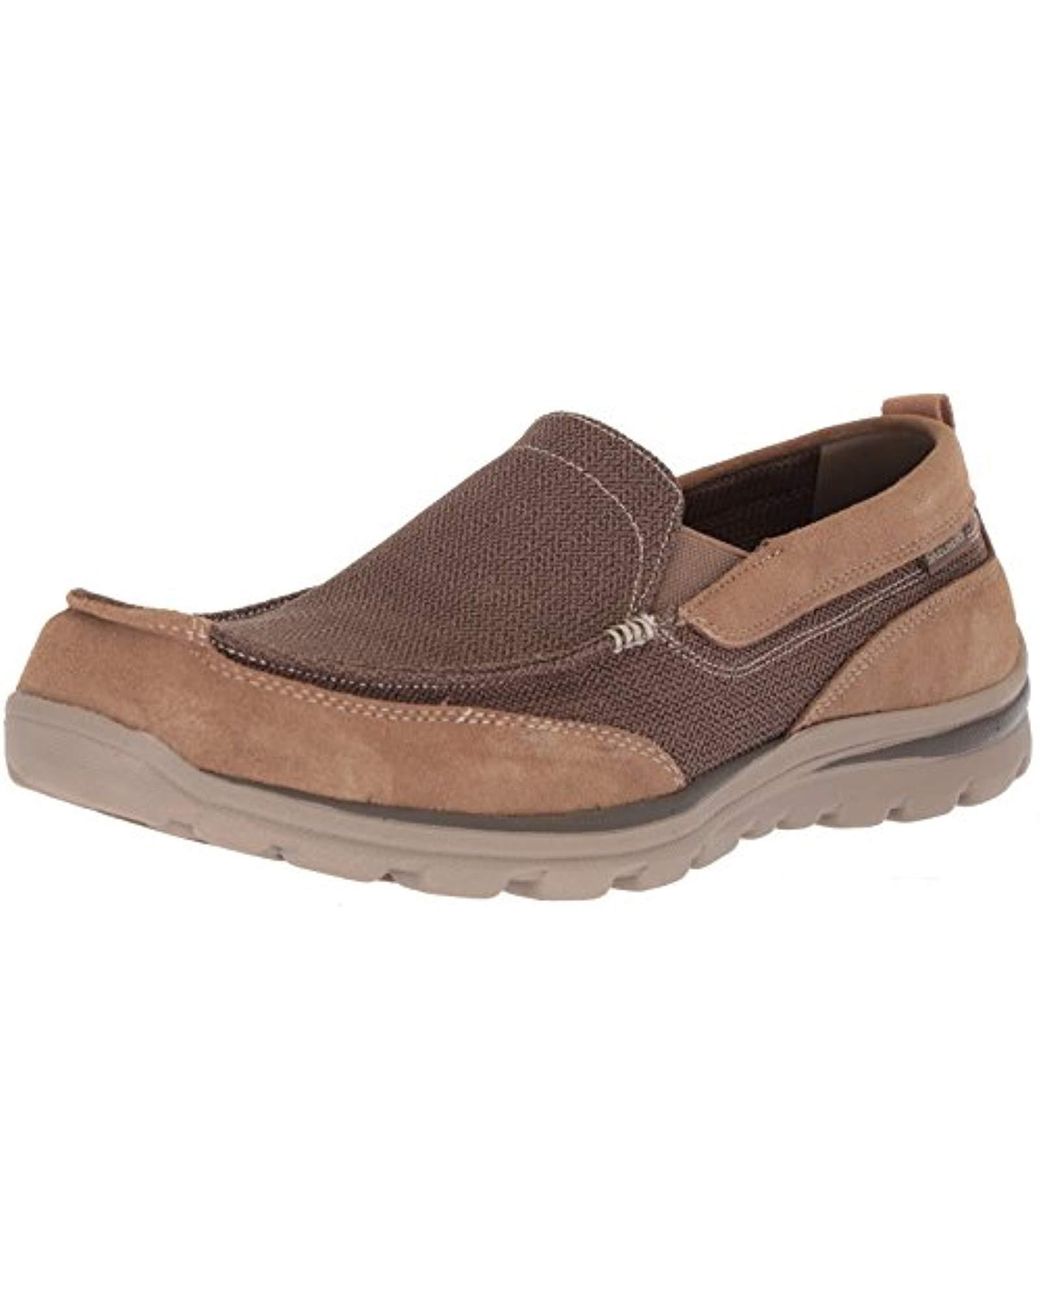 Skechers Relaxed Fit-superior-milford Loafer in Light Brown (Brown) for ...